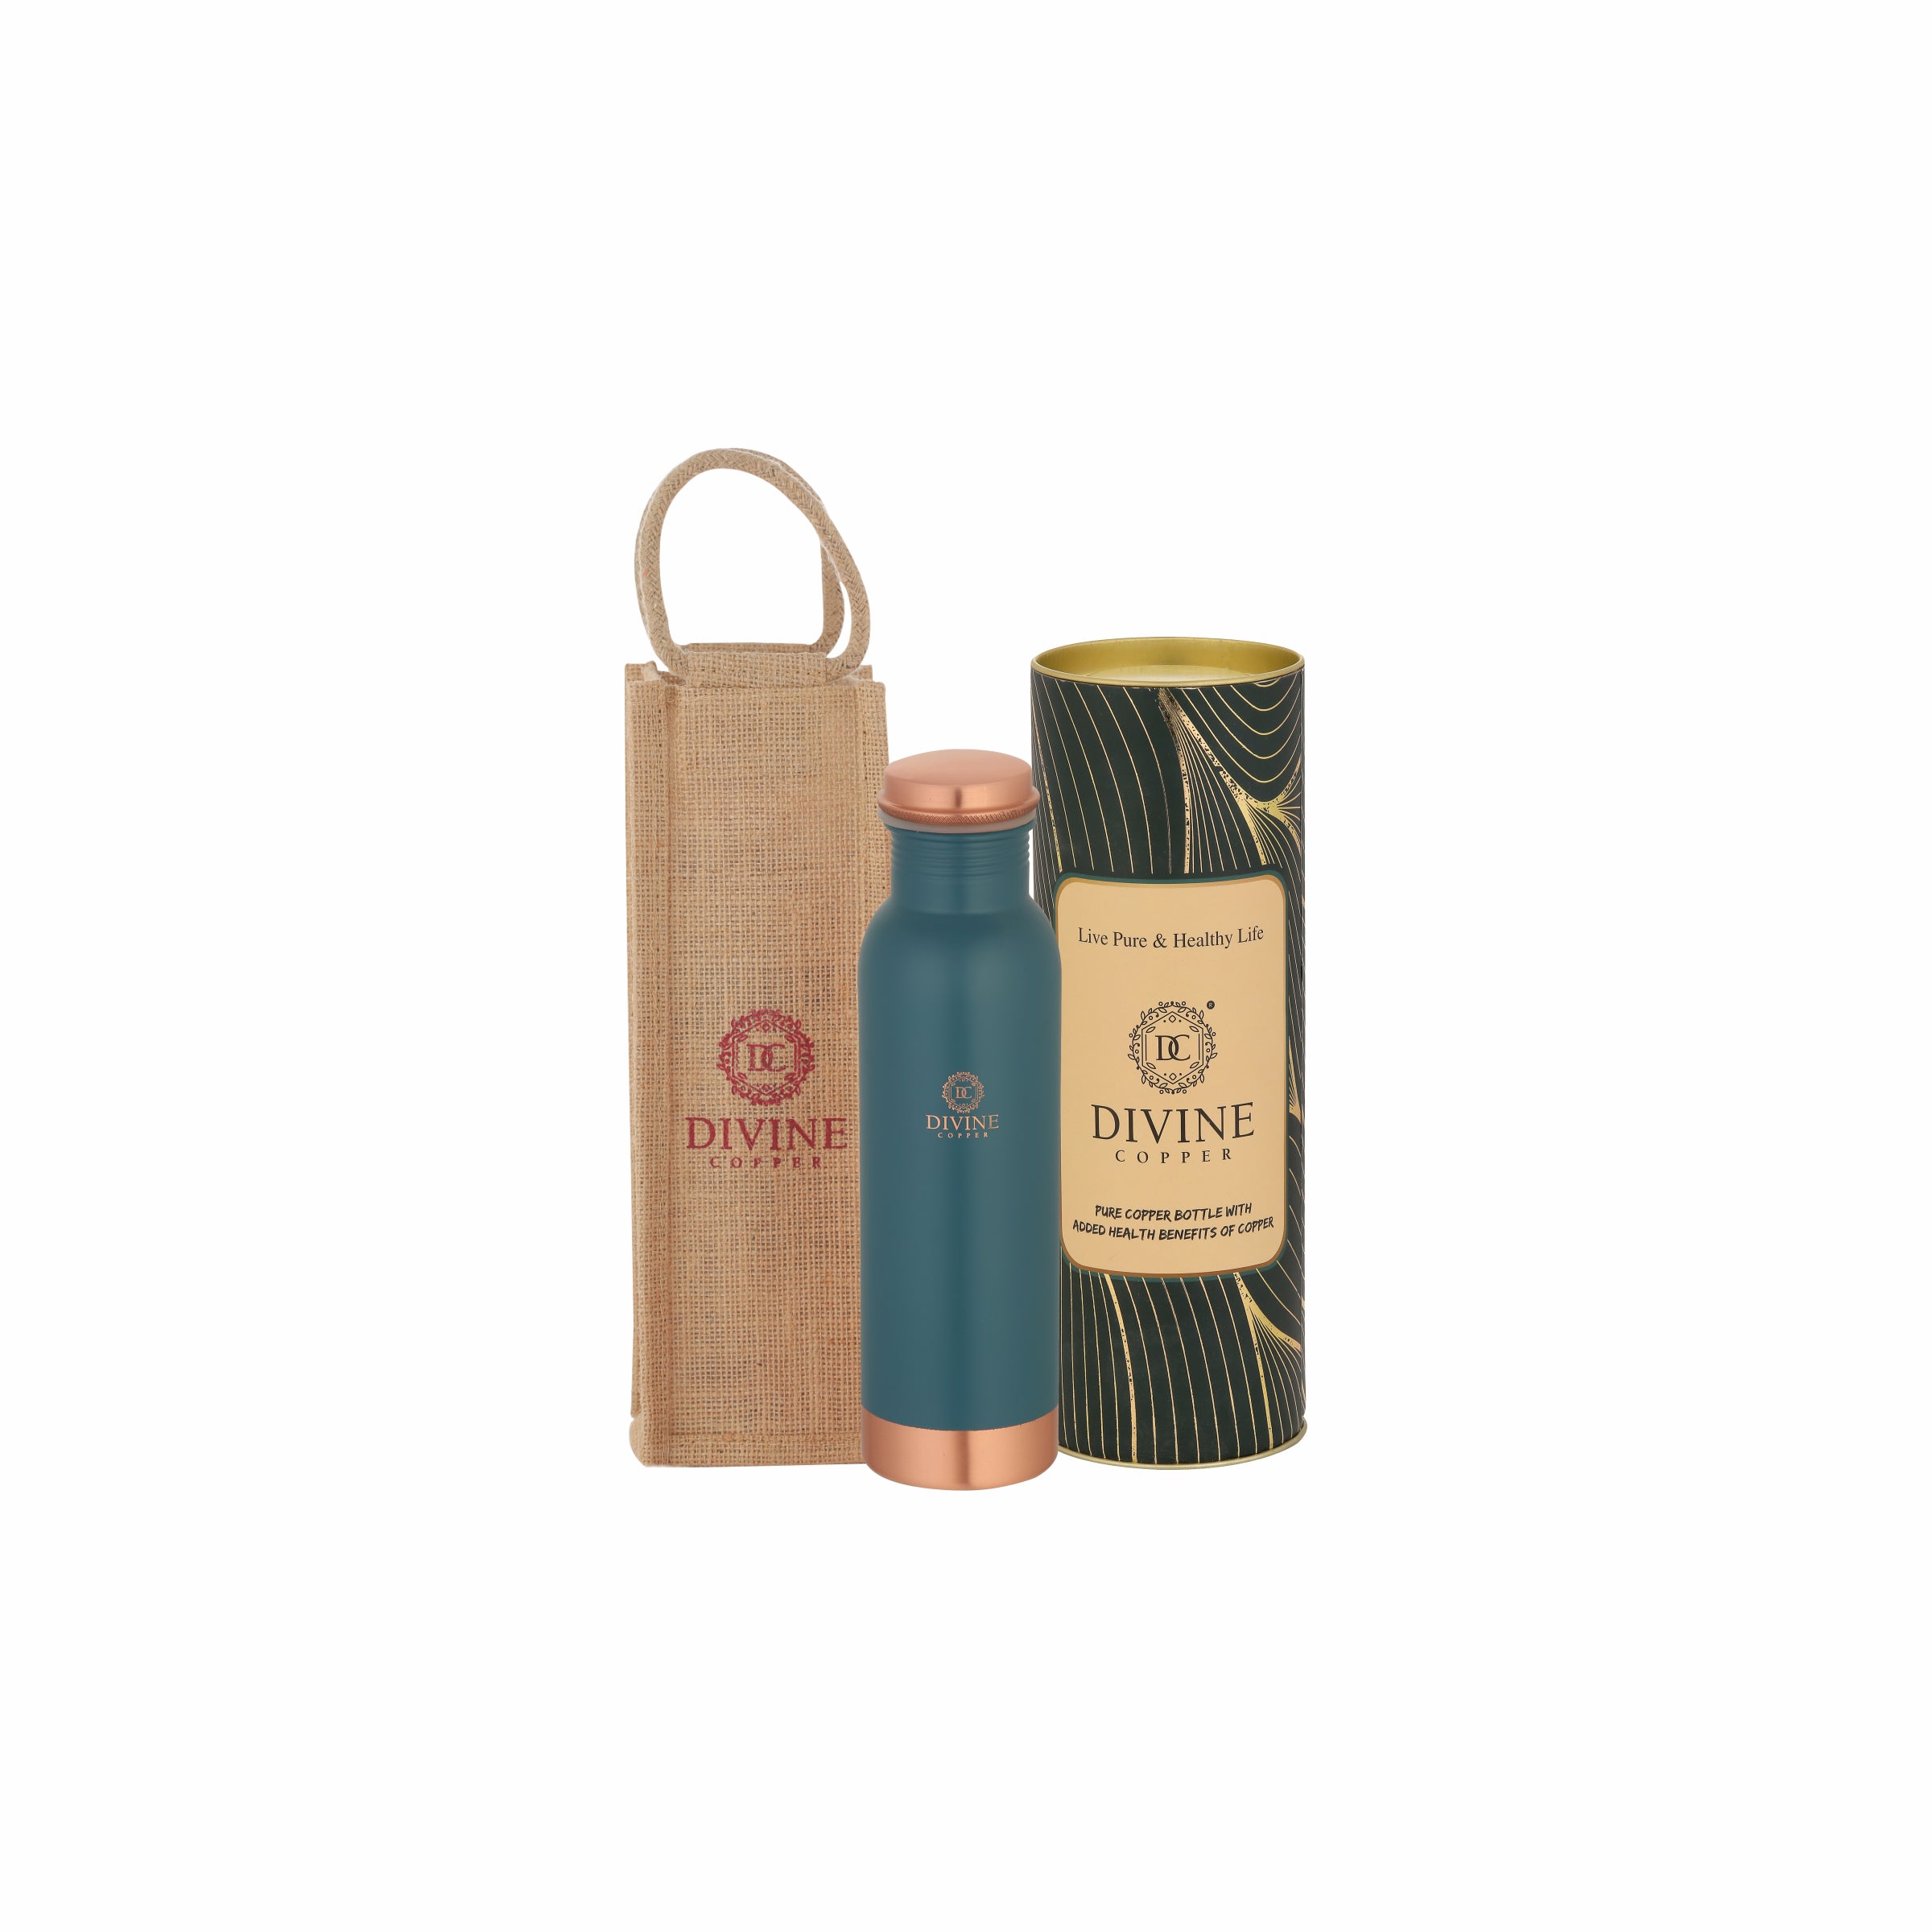 Pie 750ml Green Pure copper bottle with Free Jute carry bag